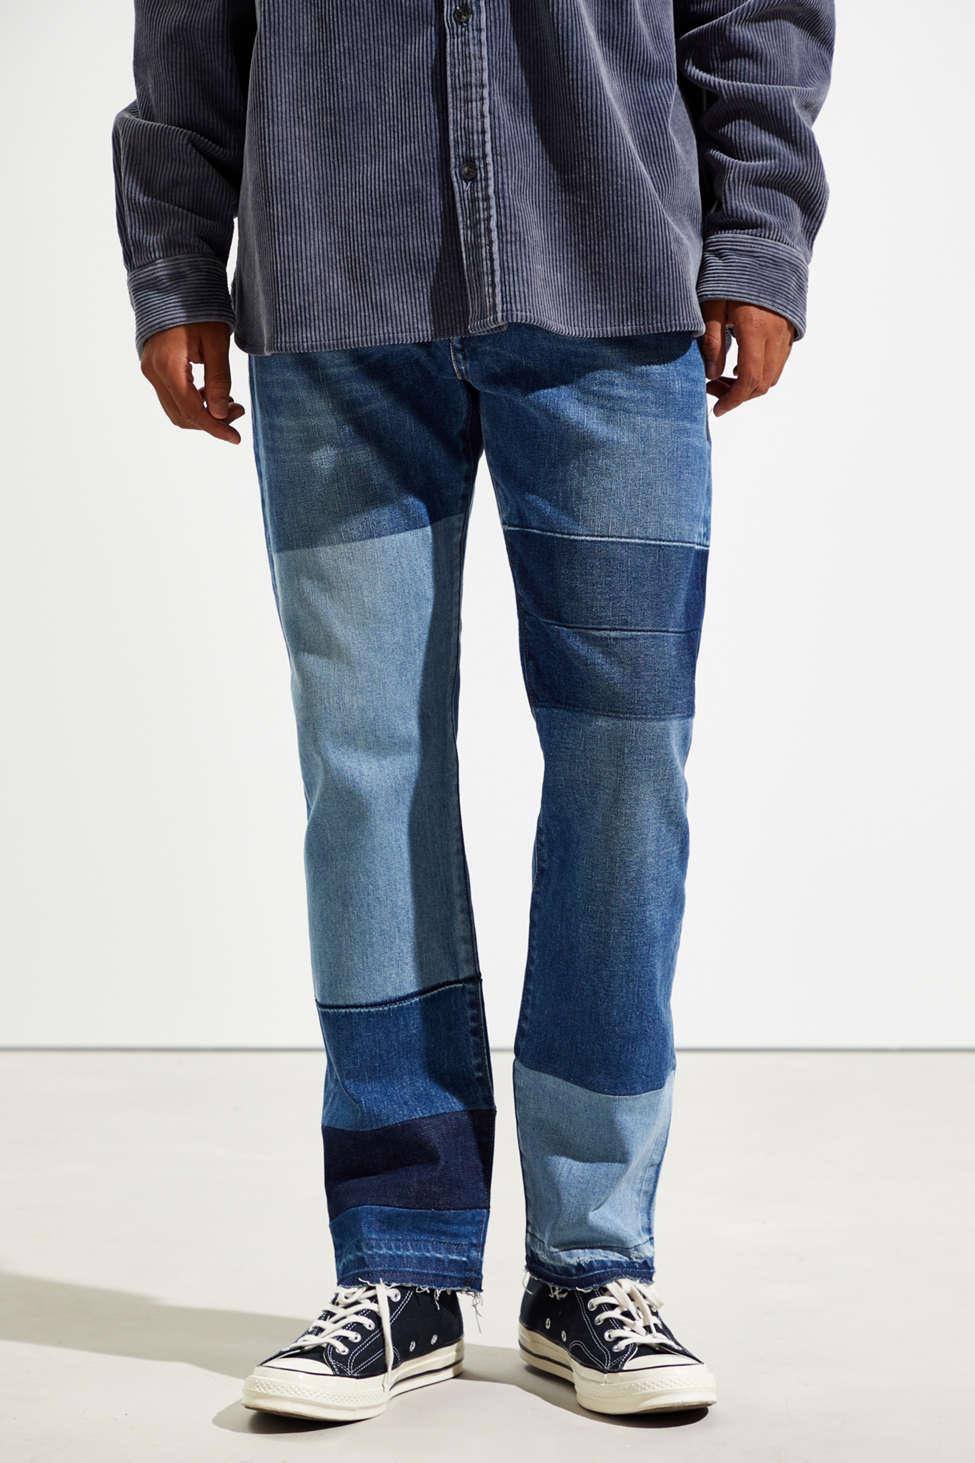 Levi's Levi's Made & Crafted Made In Japan 502 Selvedge Tapered